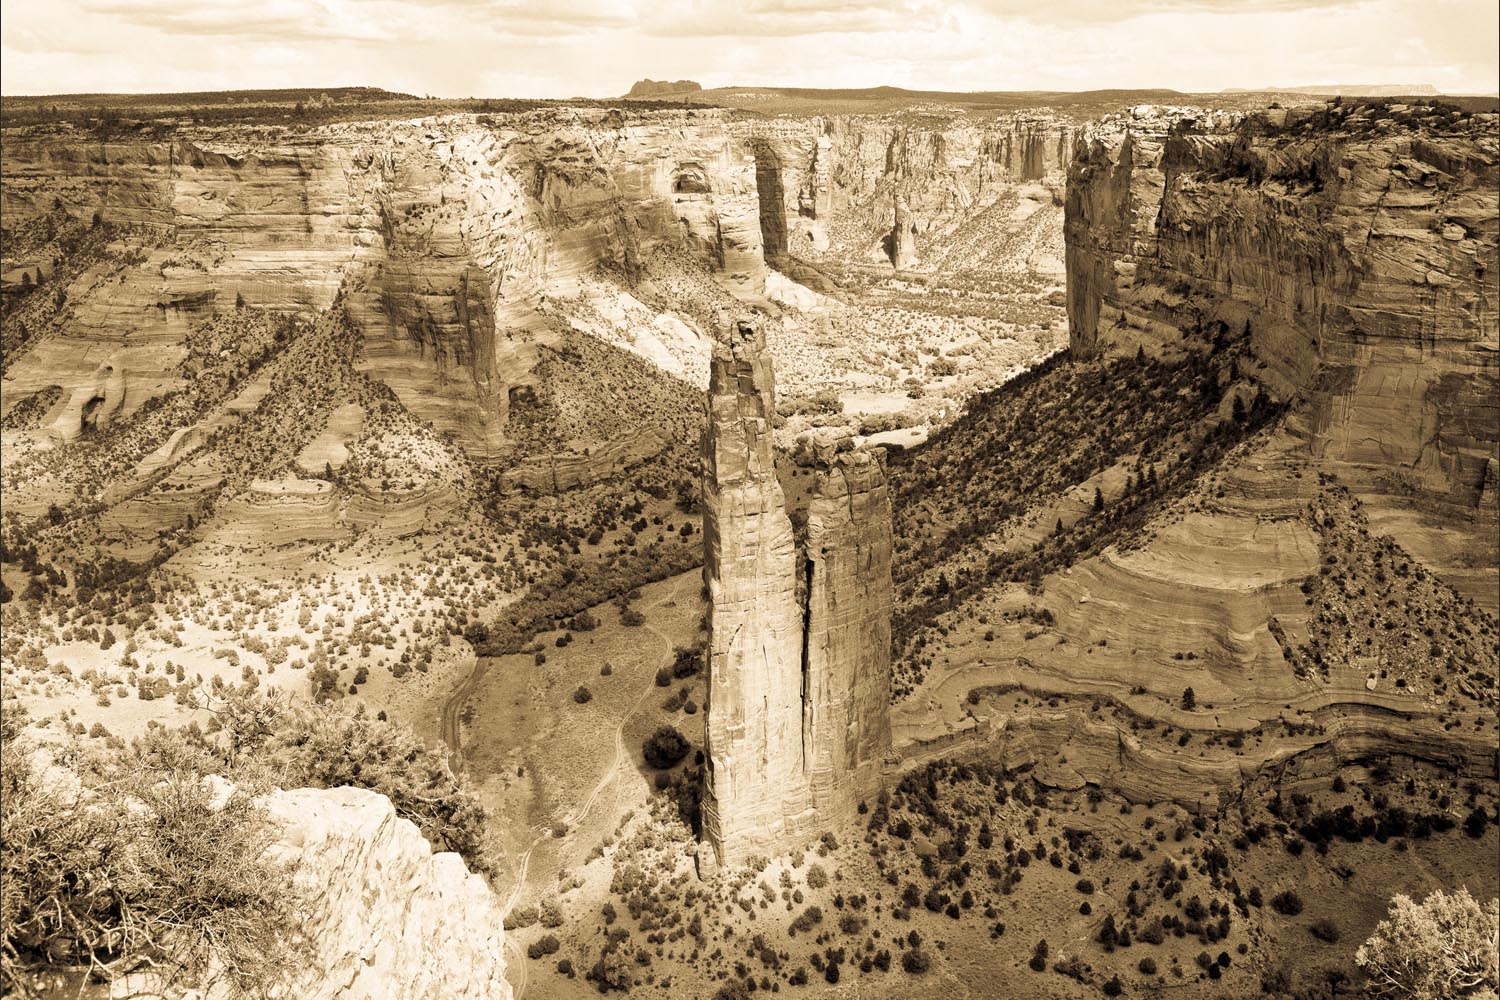 Guy Giersch: Spider Rock - Canyon de Chelly National Monument